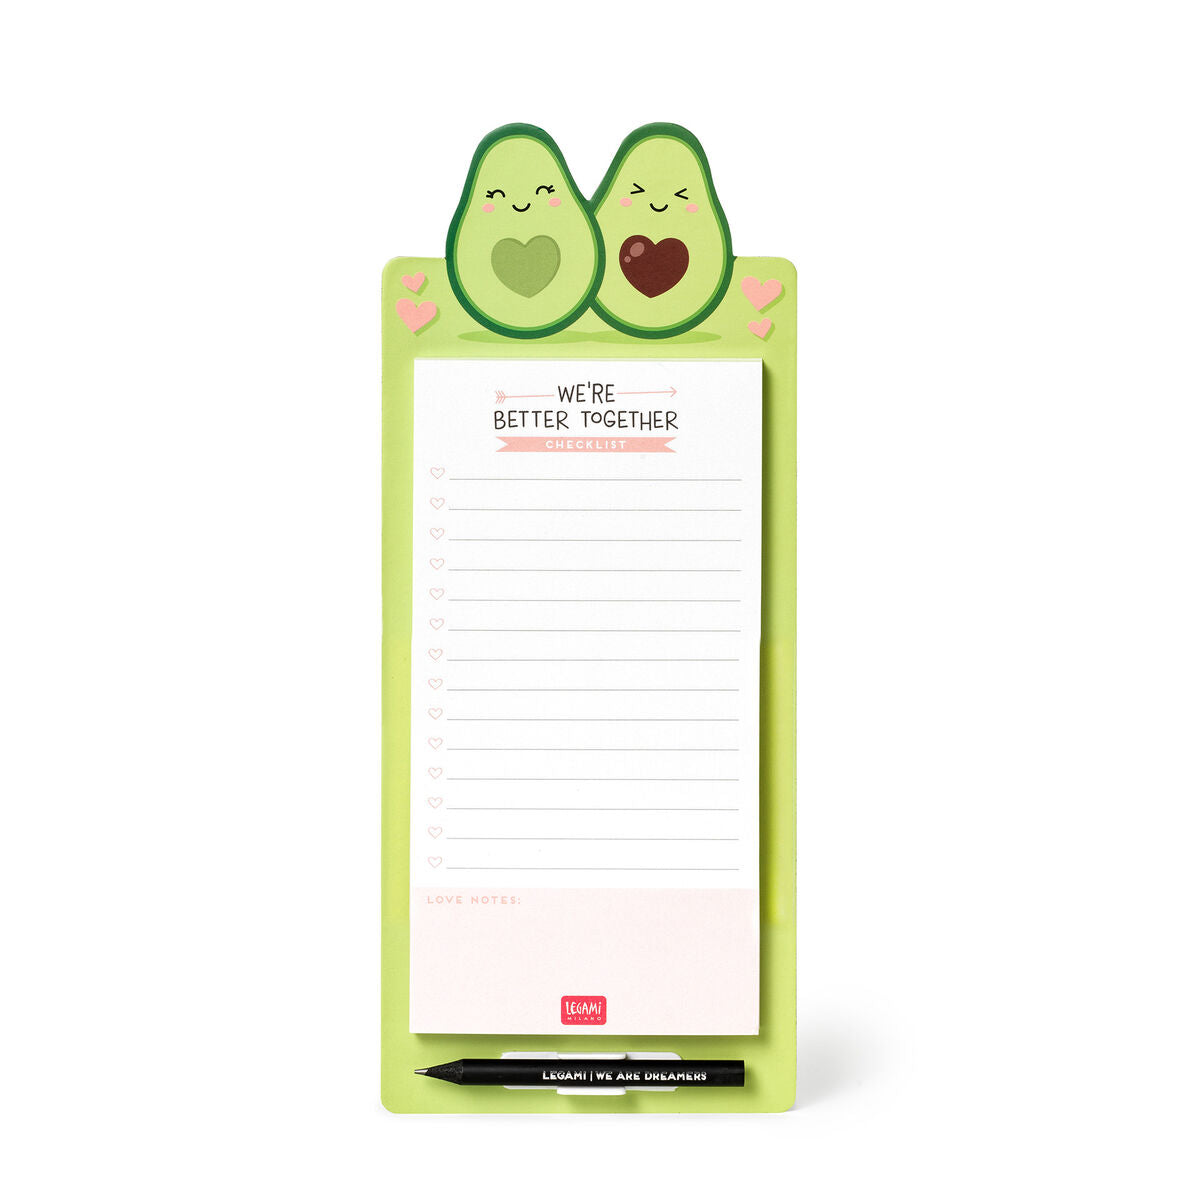 Summer Accessories - Legami Don't Forget Magnetic Notepad - Avocado by Weirs of Baggot Street